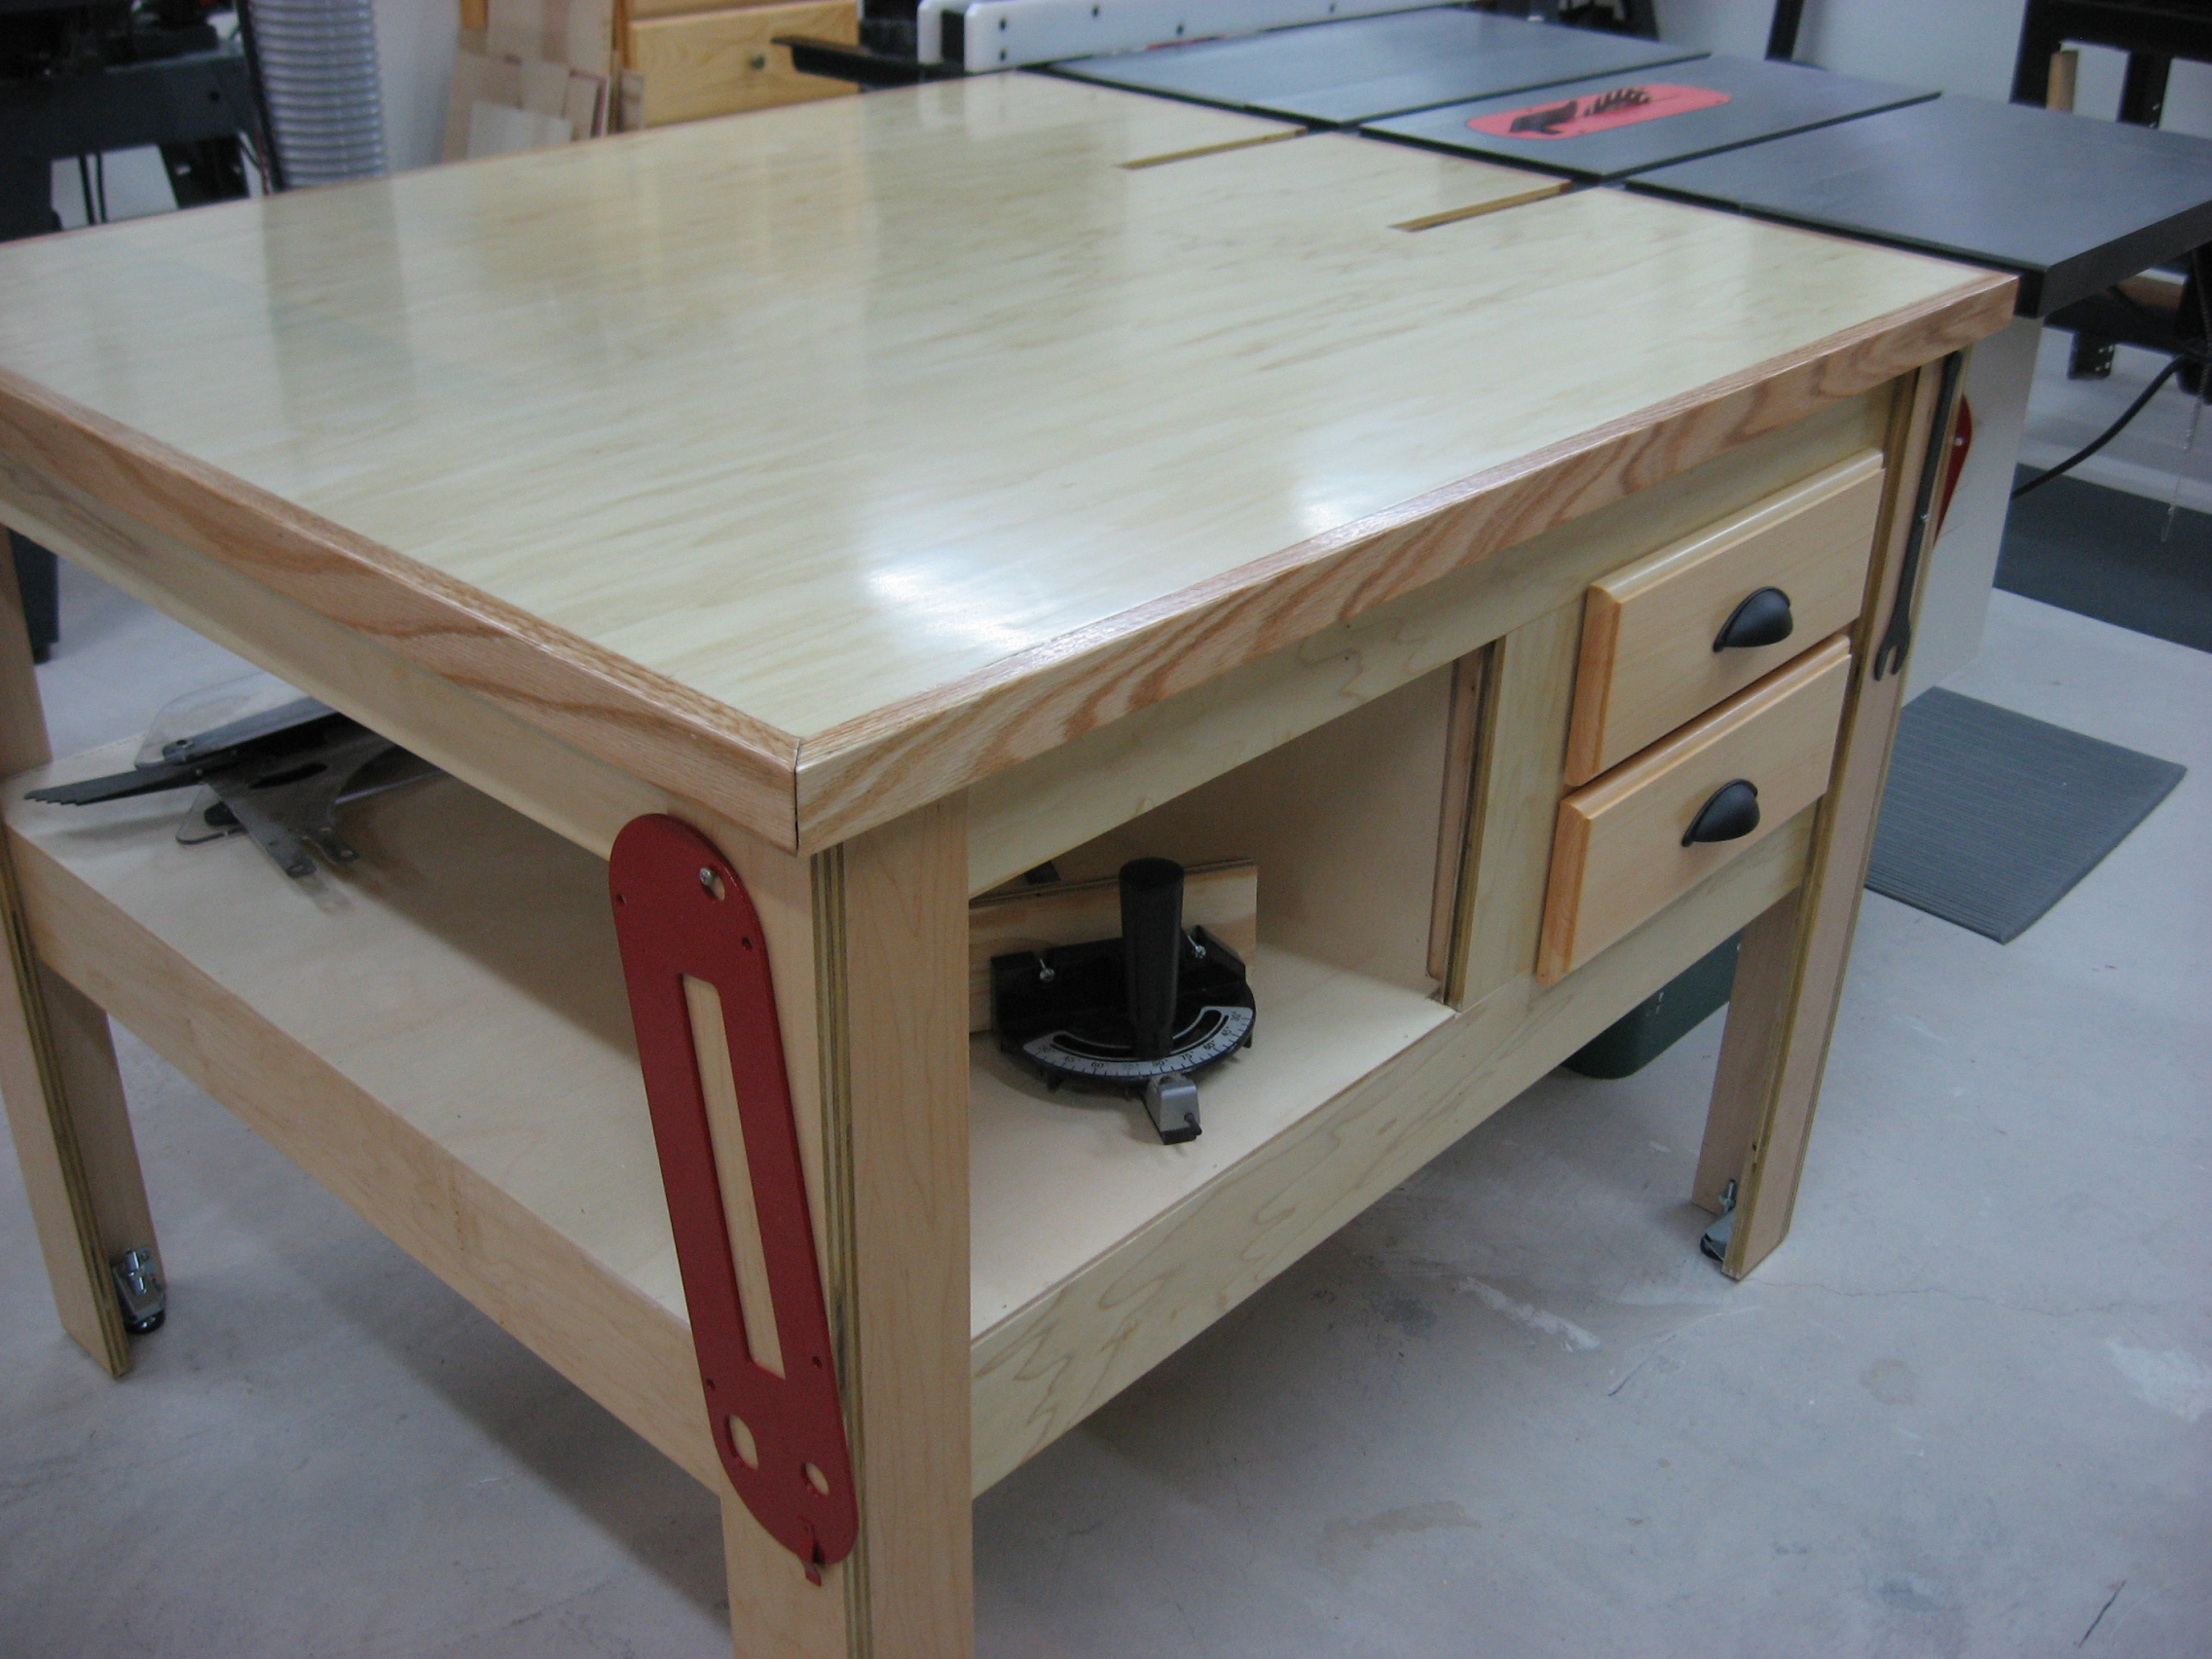 You may show original images and post about Table Saw Outfeed Table